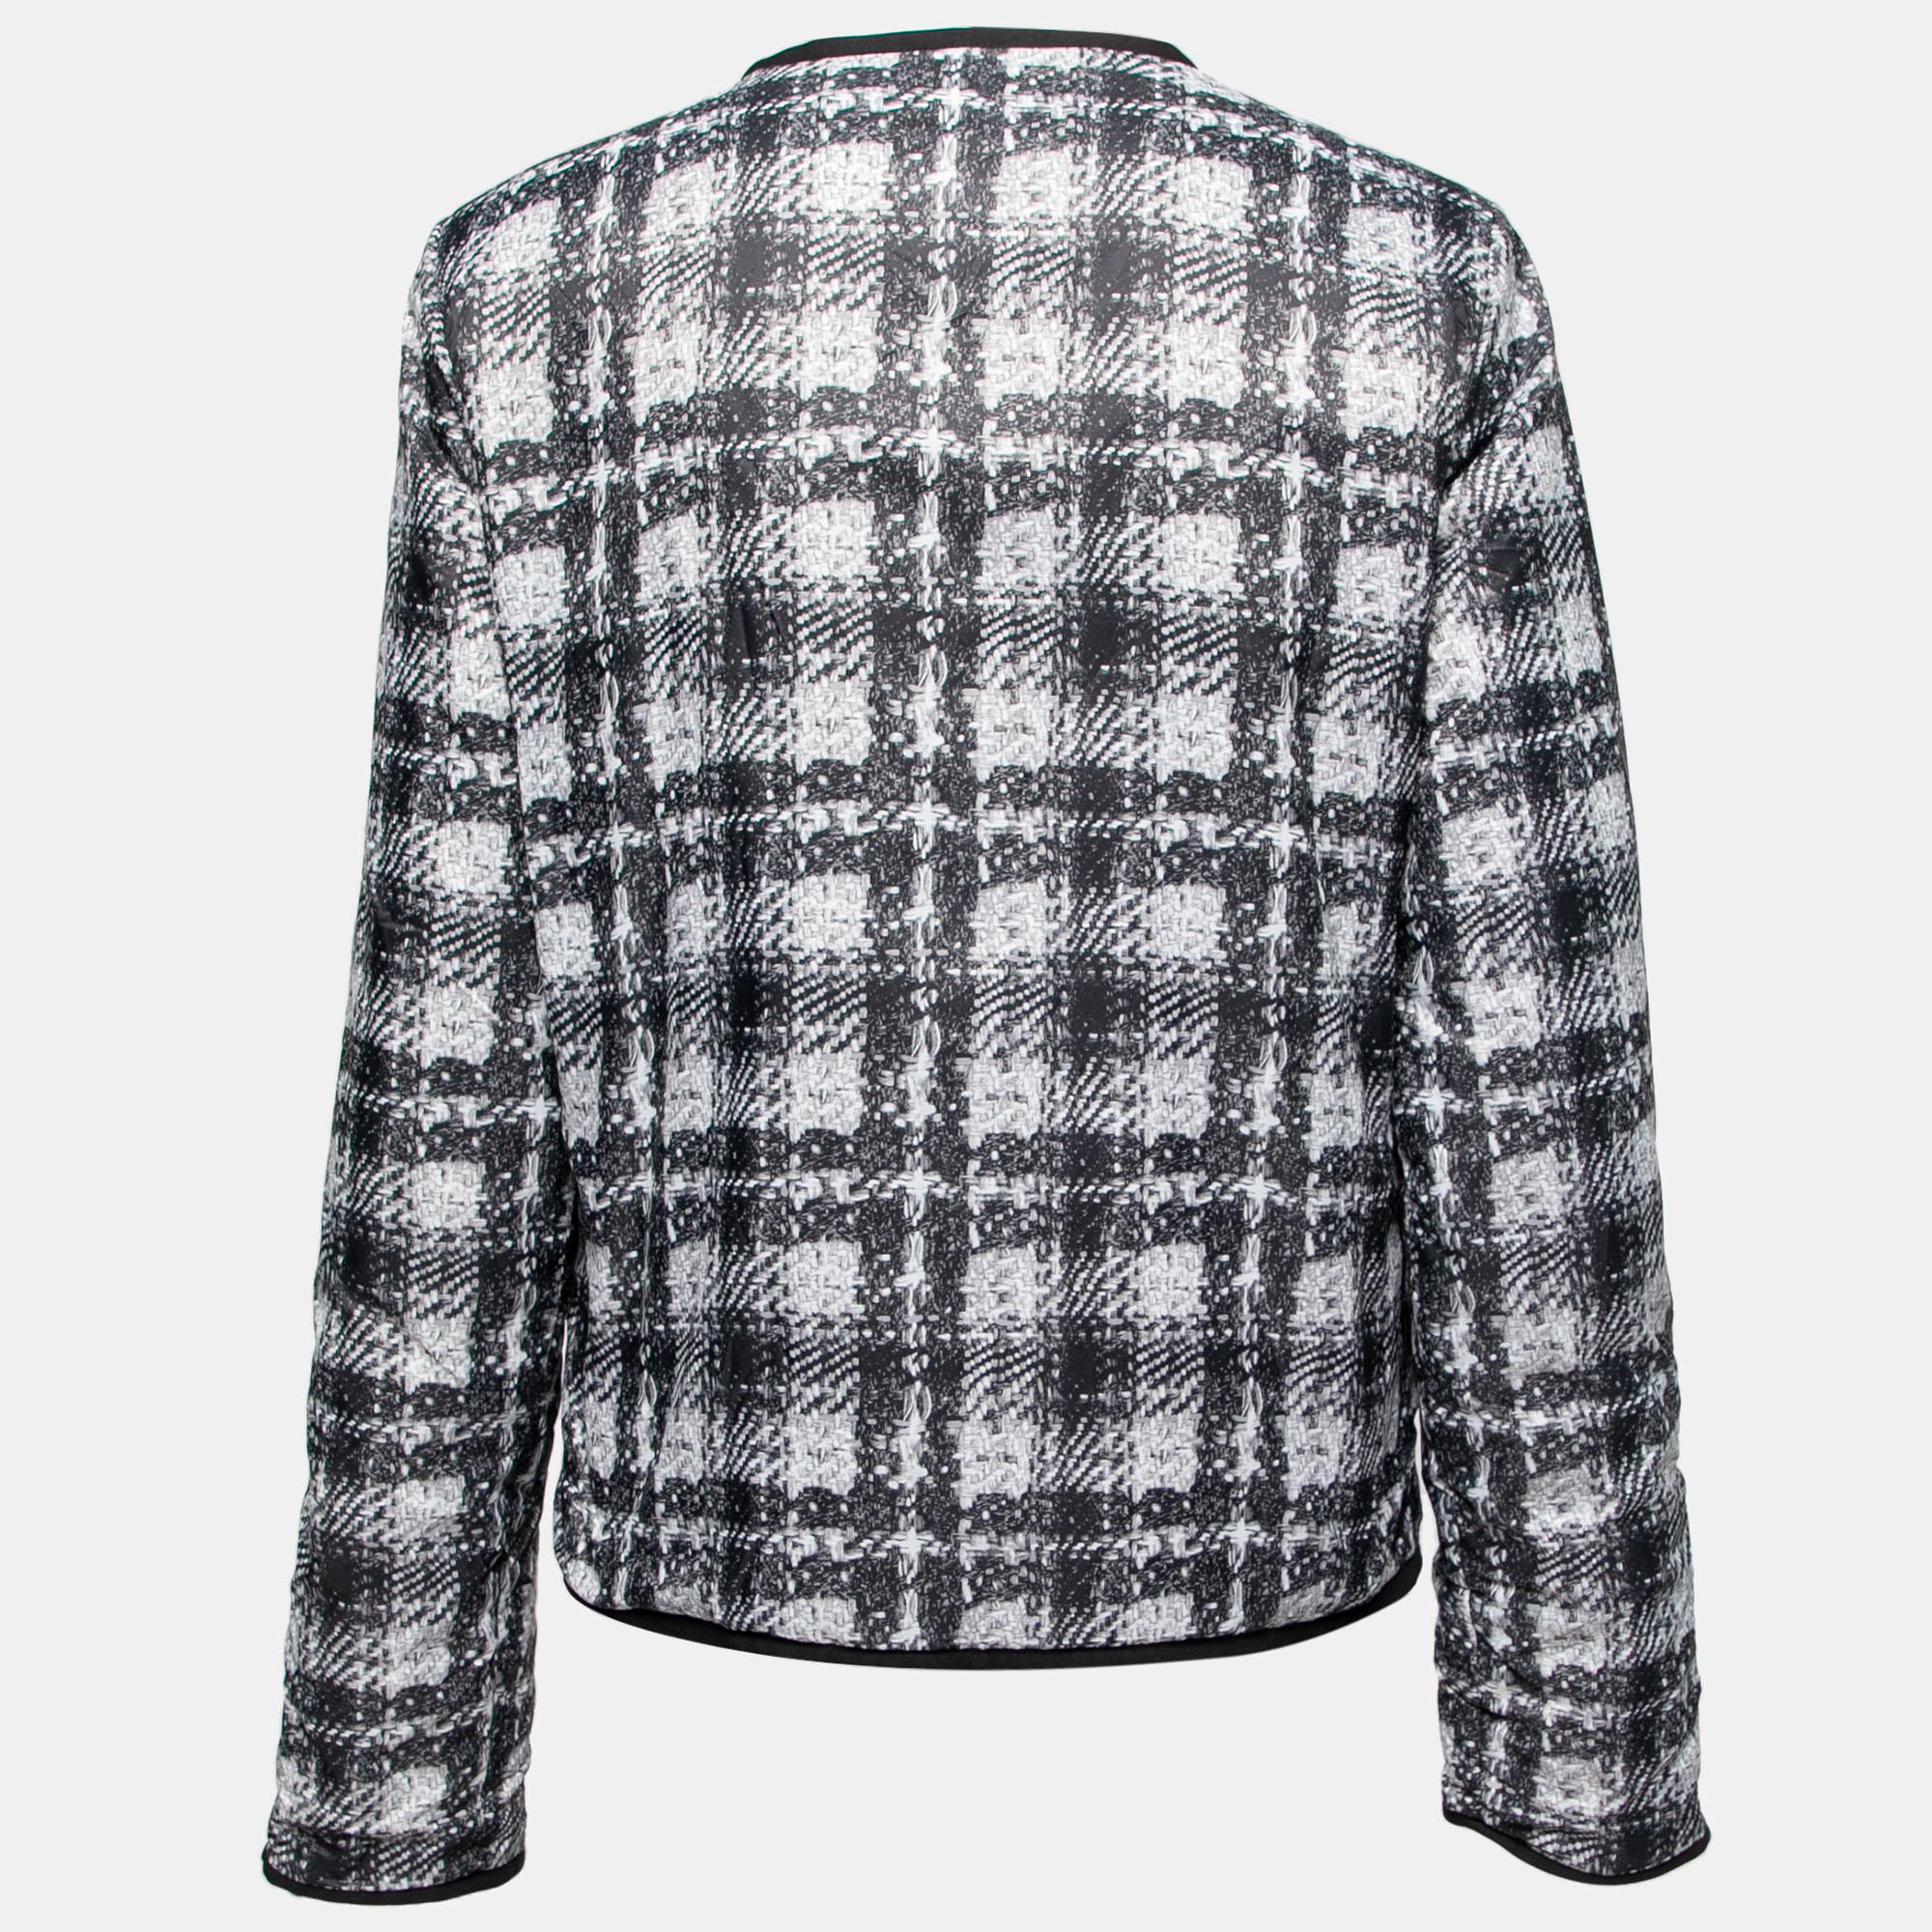 Elevated with a checked tweed print, this Chanel jacket will infuse an extra dose of style into your outfit. Flaunting an elegant silhouette, it is made using fine materials and features long sleeves, a zip closure, and pockets. Team the reversible